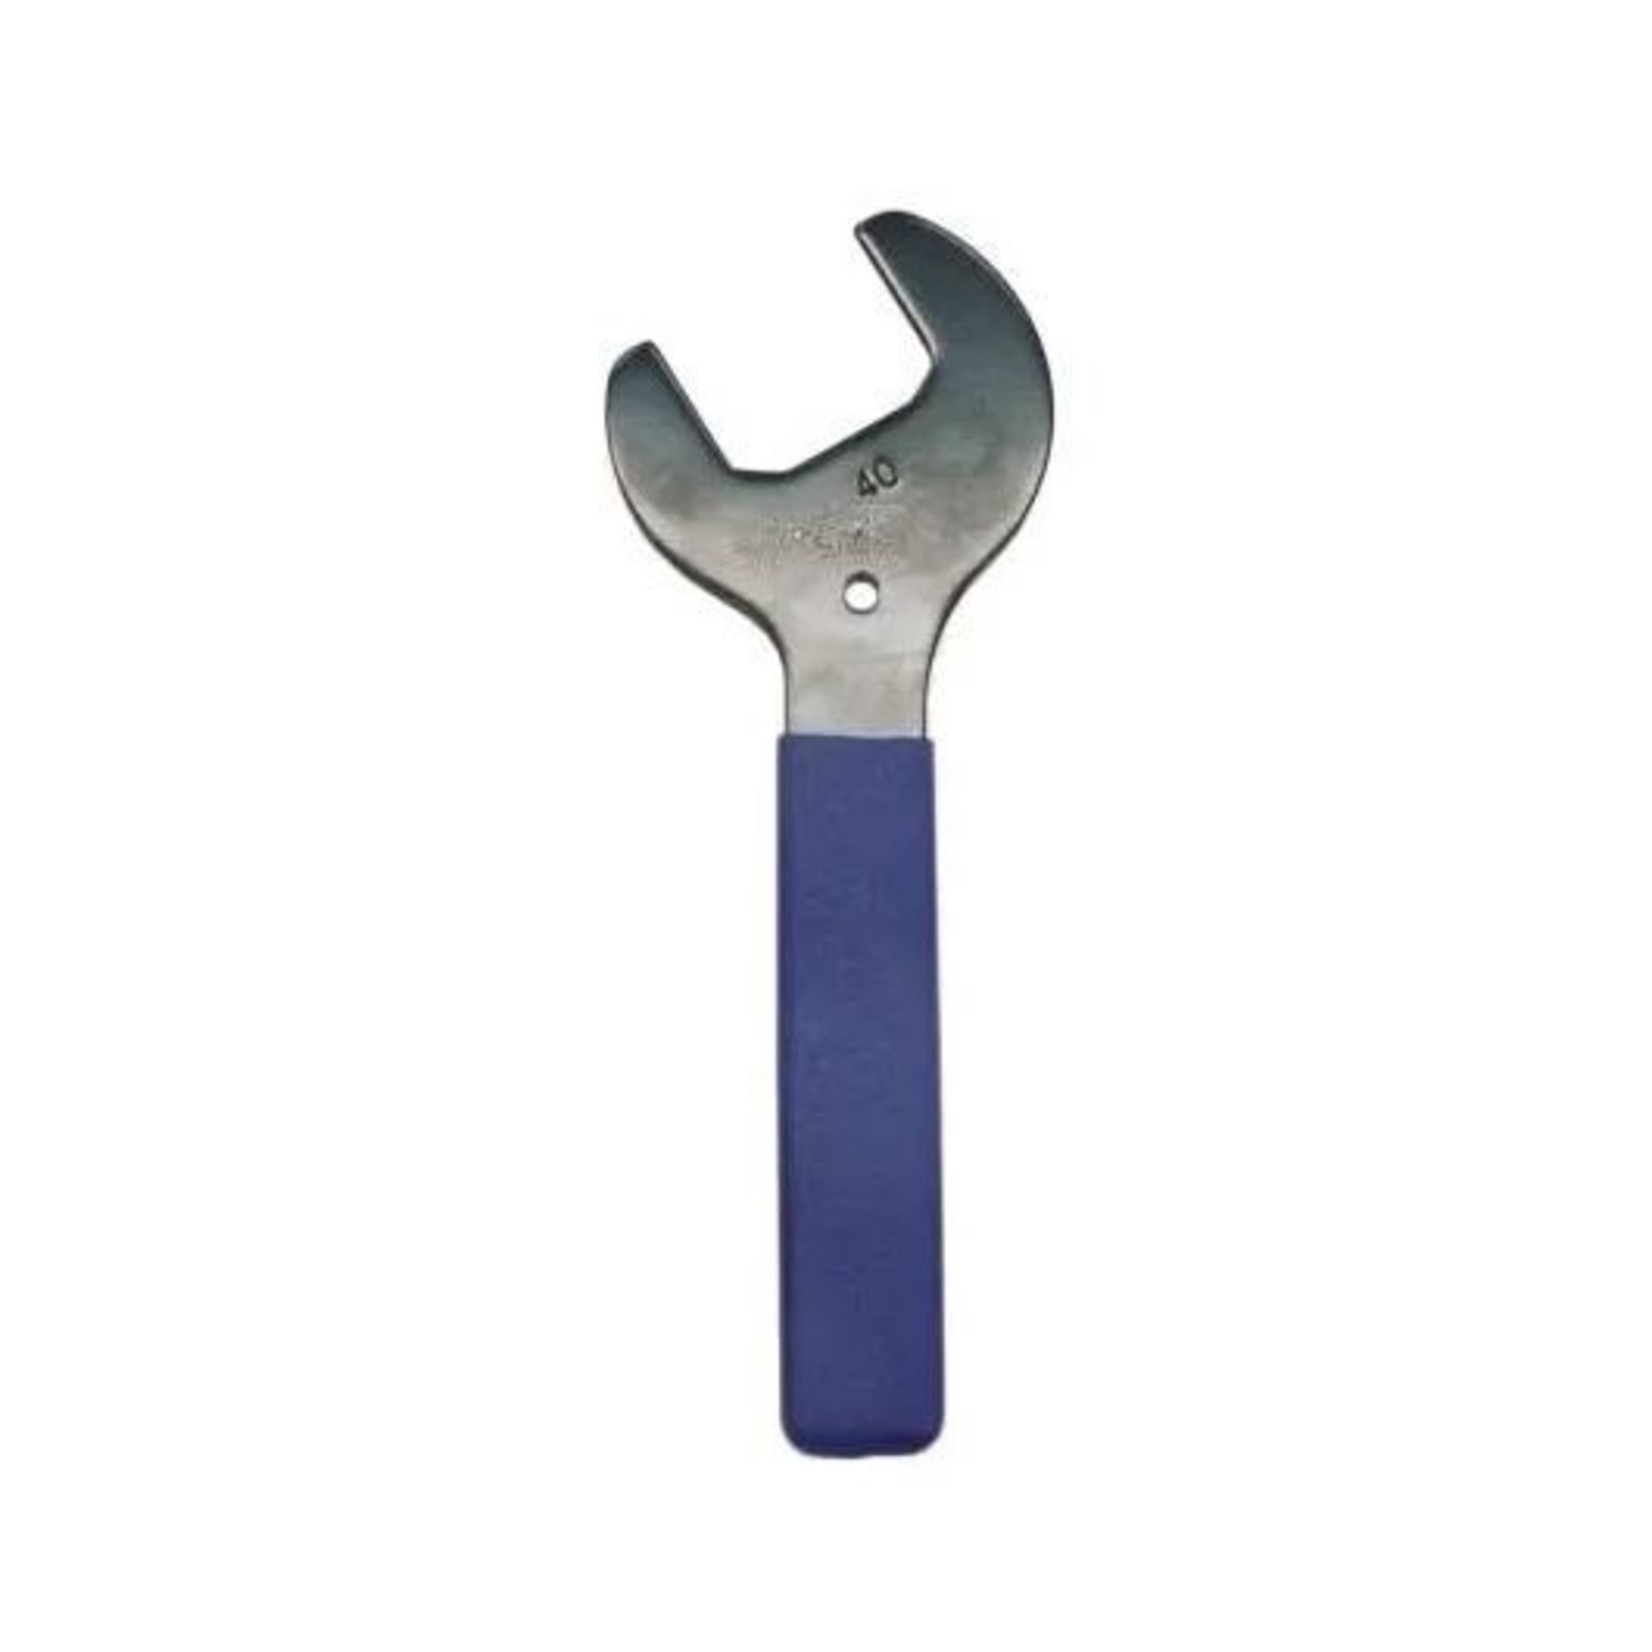 Pro Series Pro-Series - Bike/Cycling Tool - Head/Set Wrench - 40mm